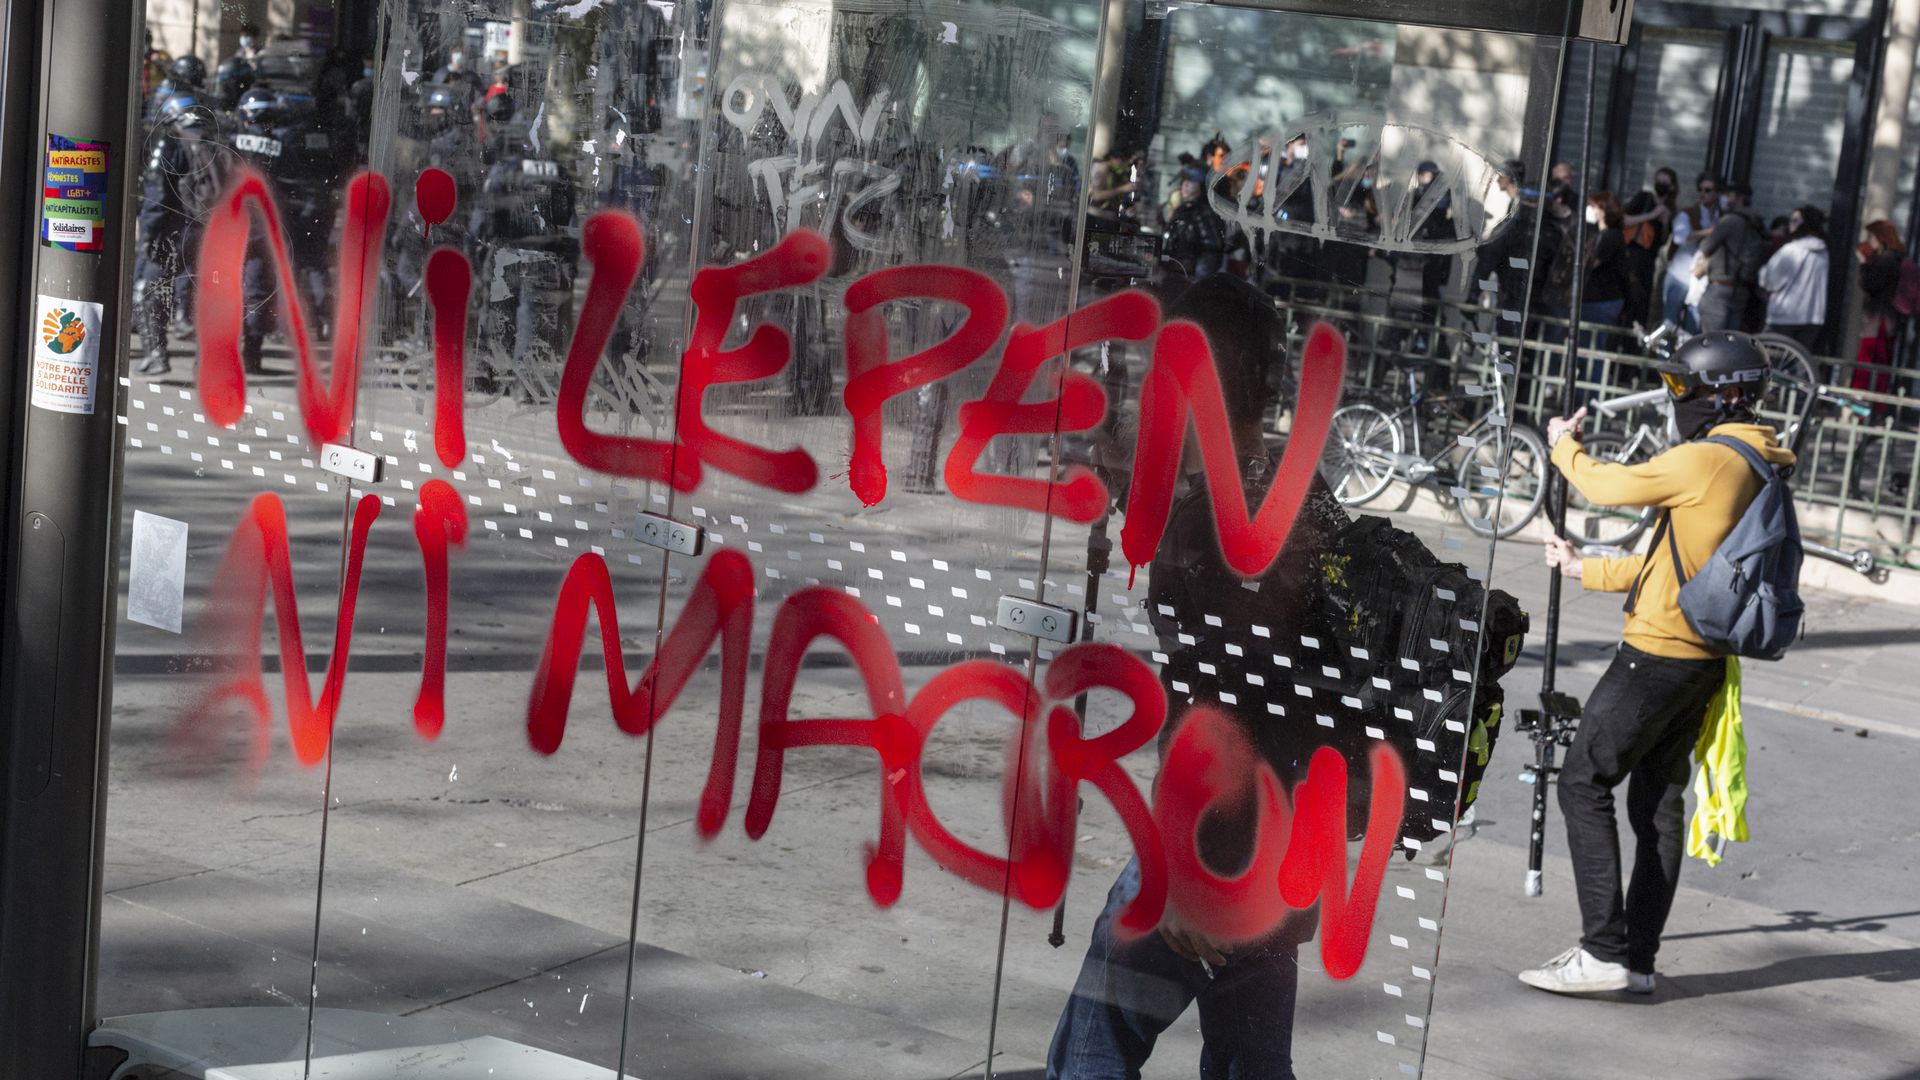 Grafitit that translates as "Neither Macron nor Le Pen" seen as protesters demonstrate 